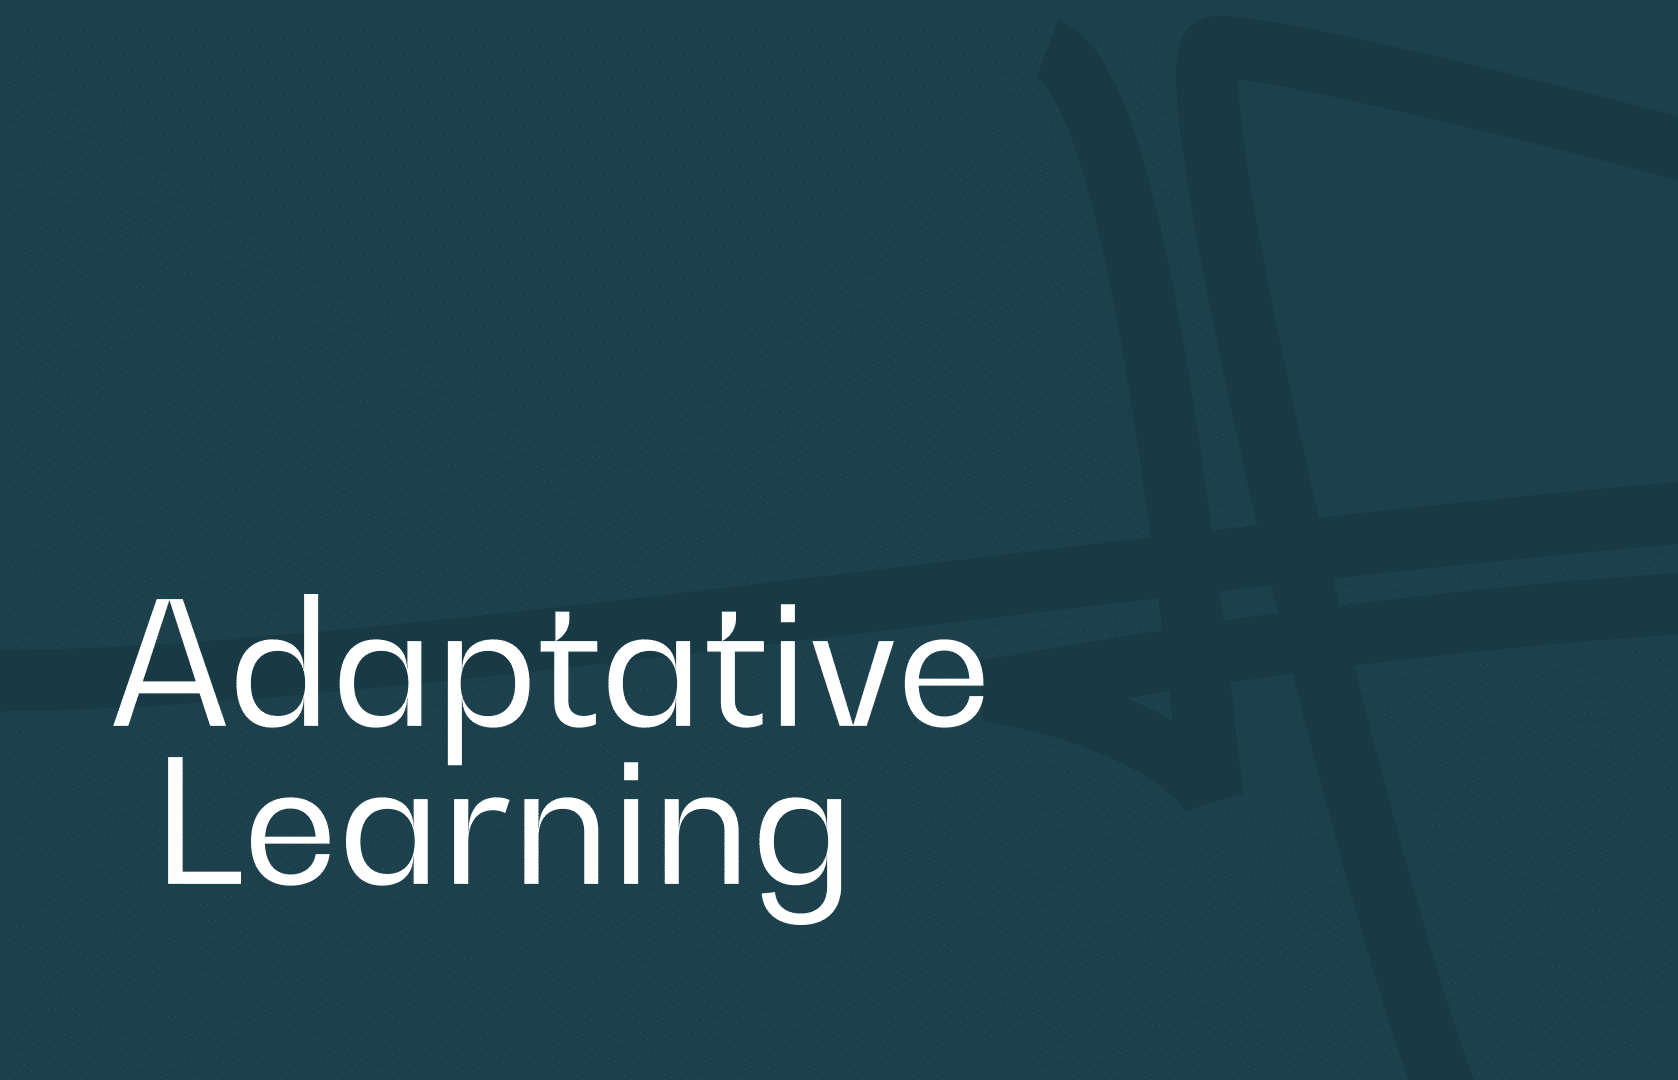 Adaptative Learning definition